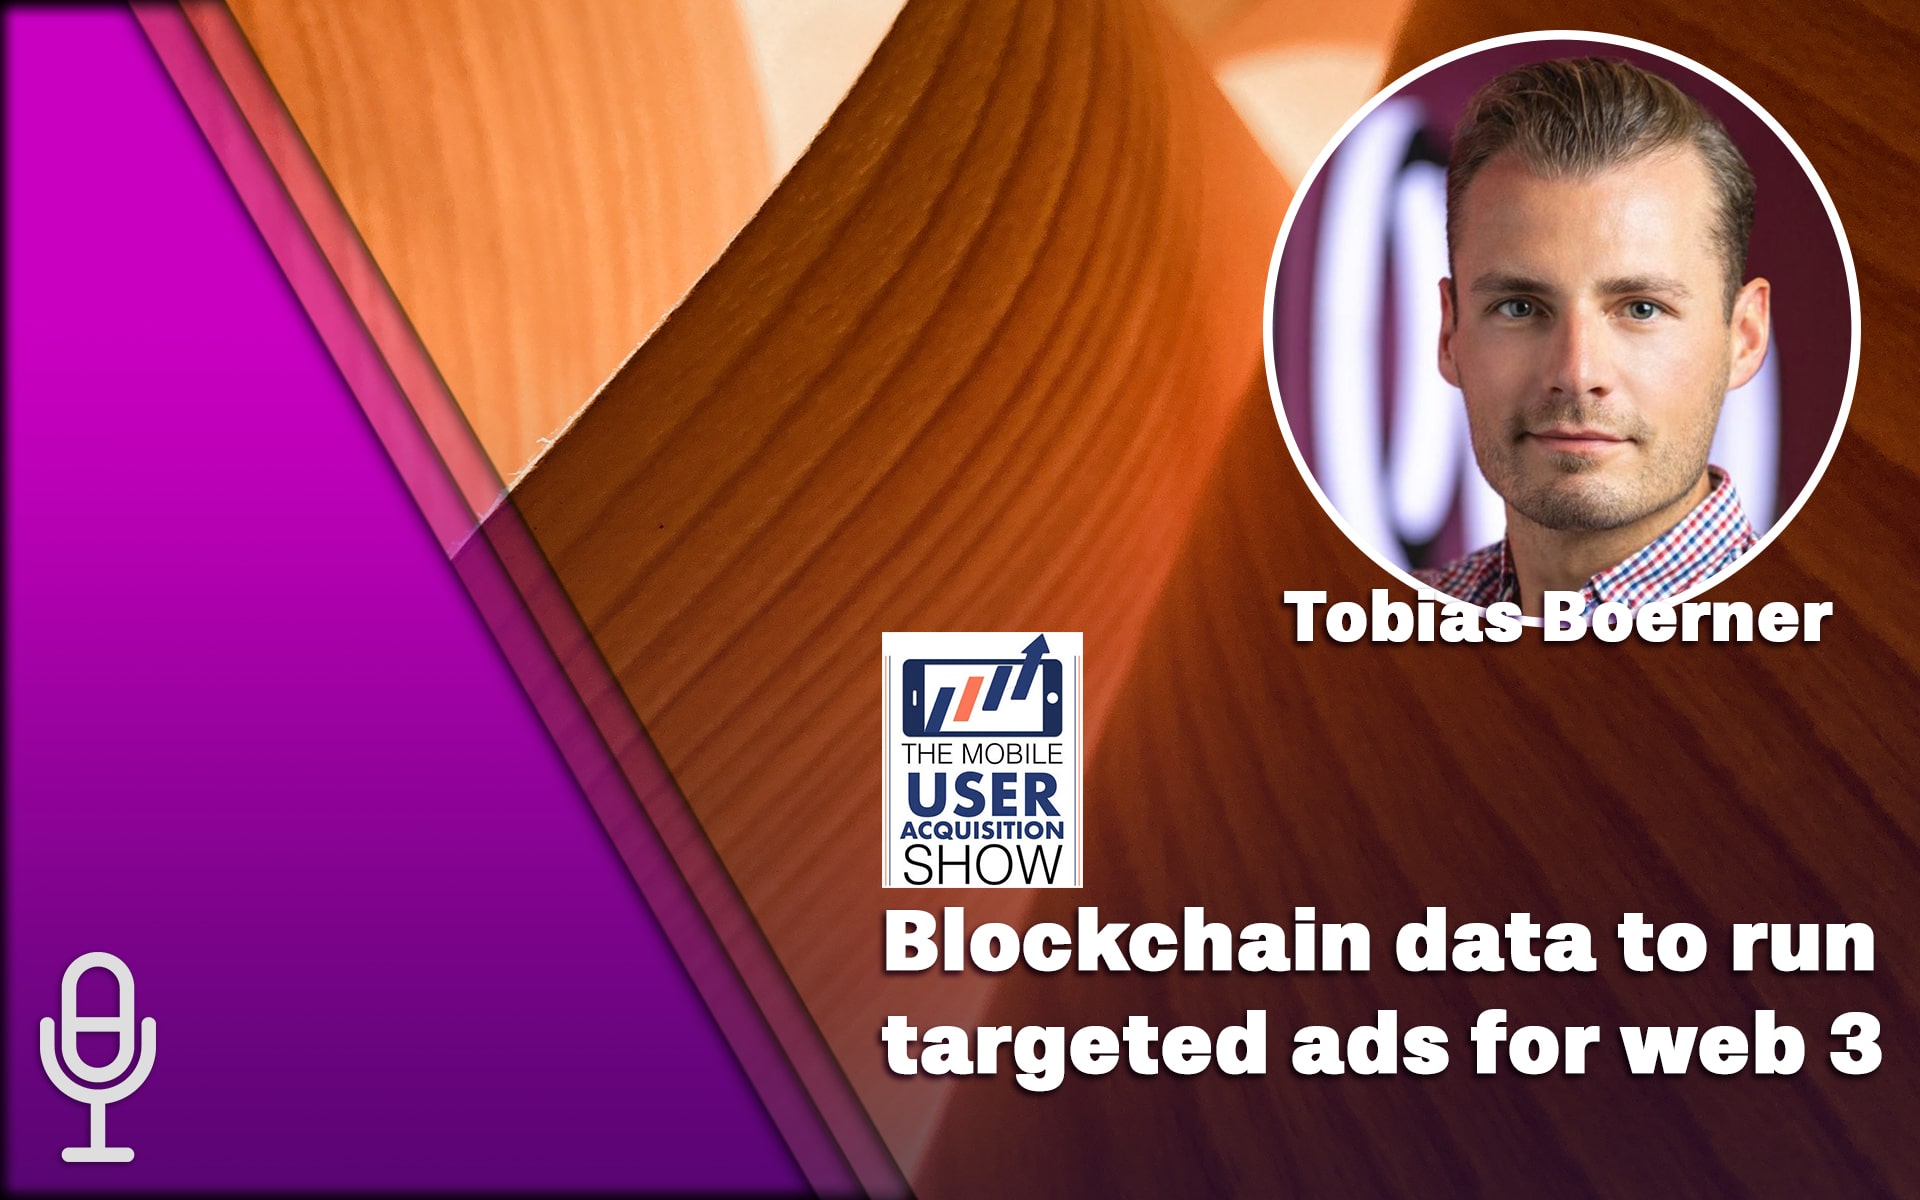 How to use blockchain data to run targeted ads for web 3